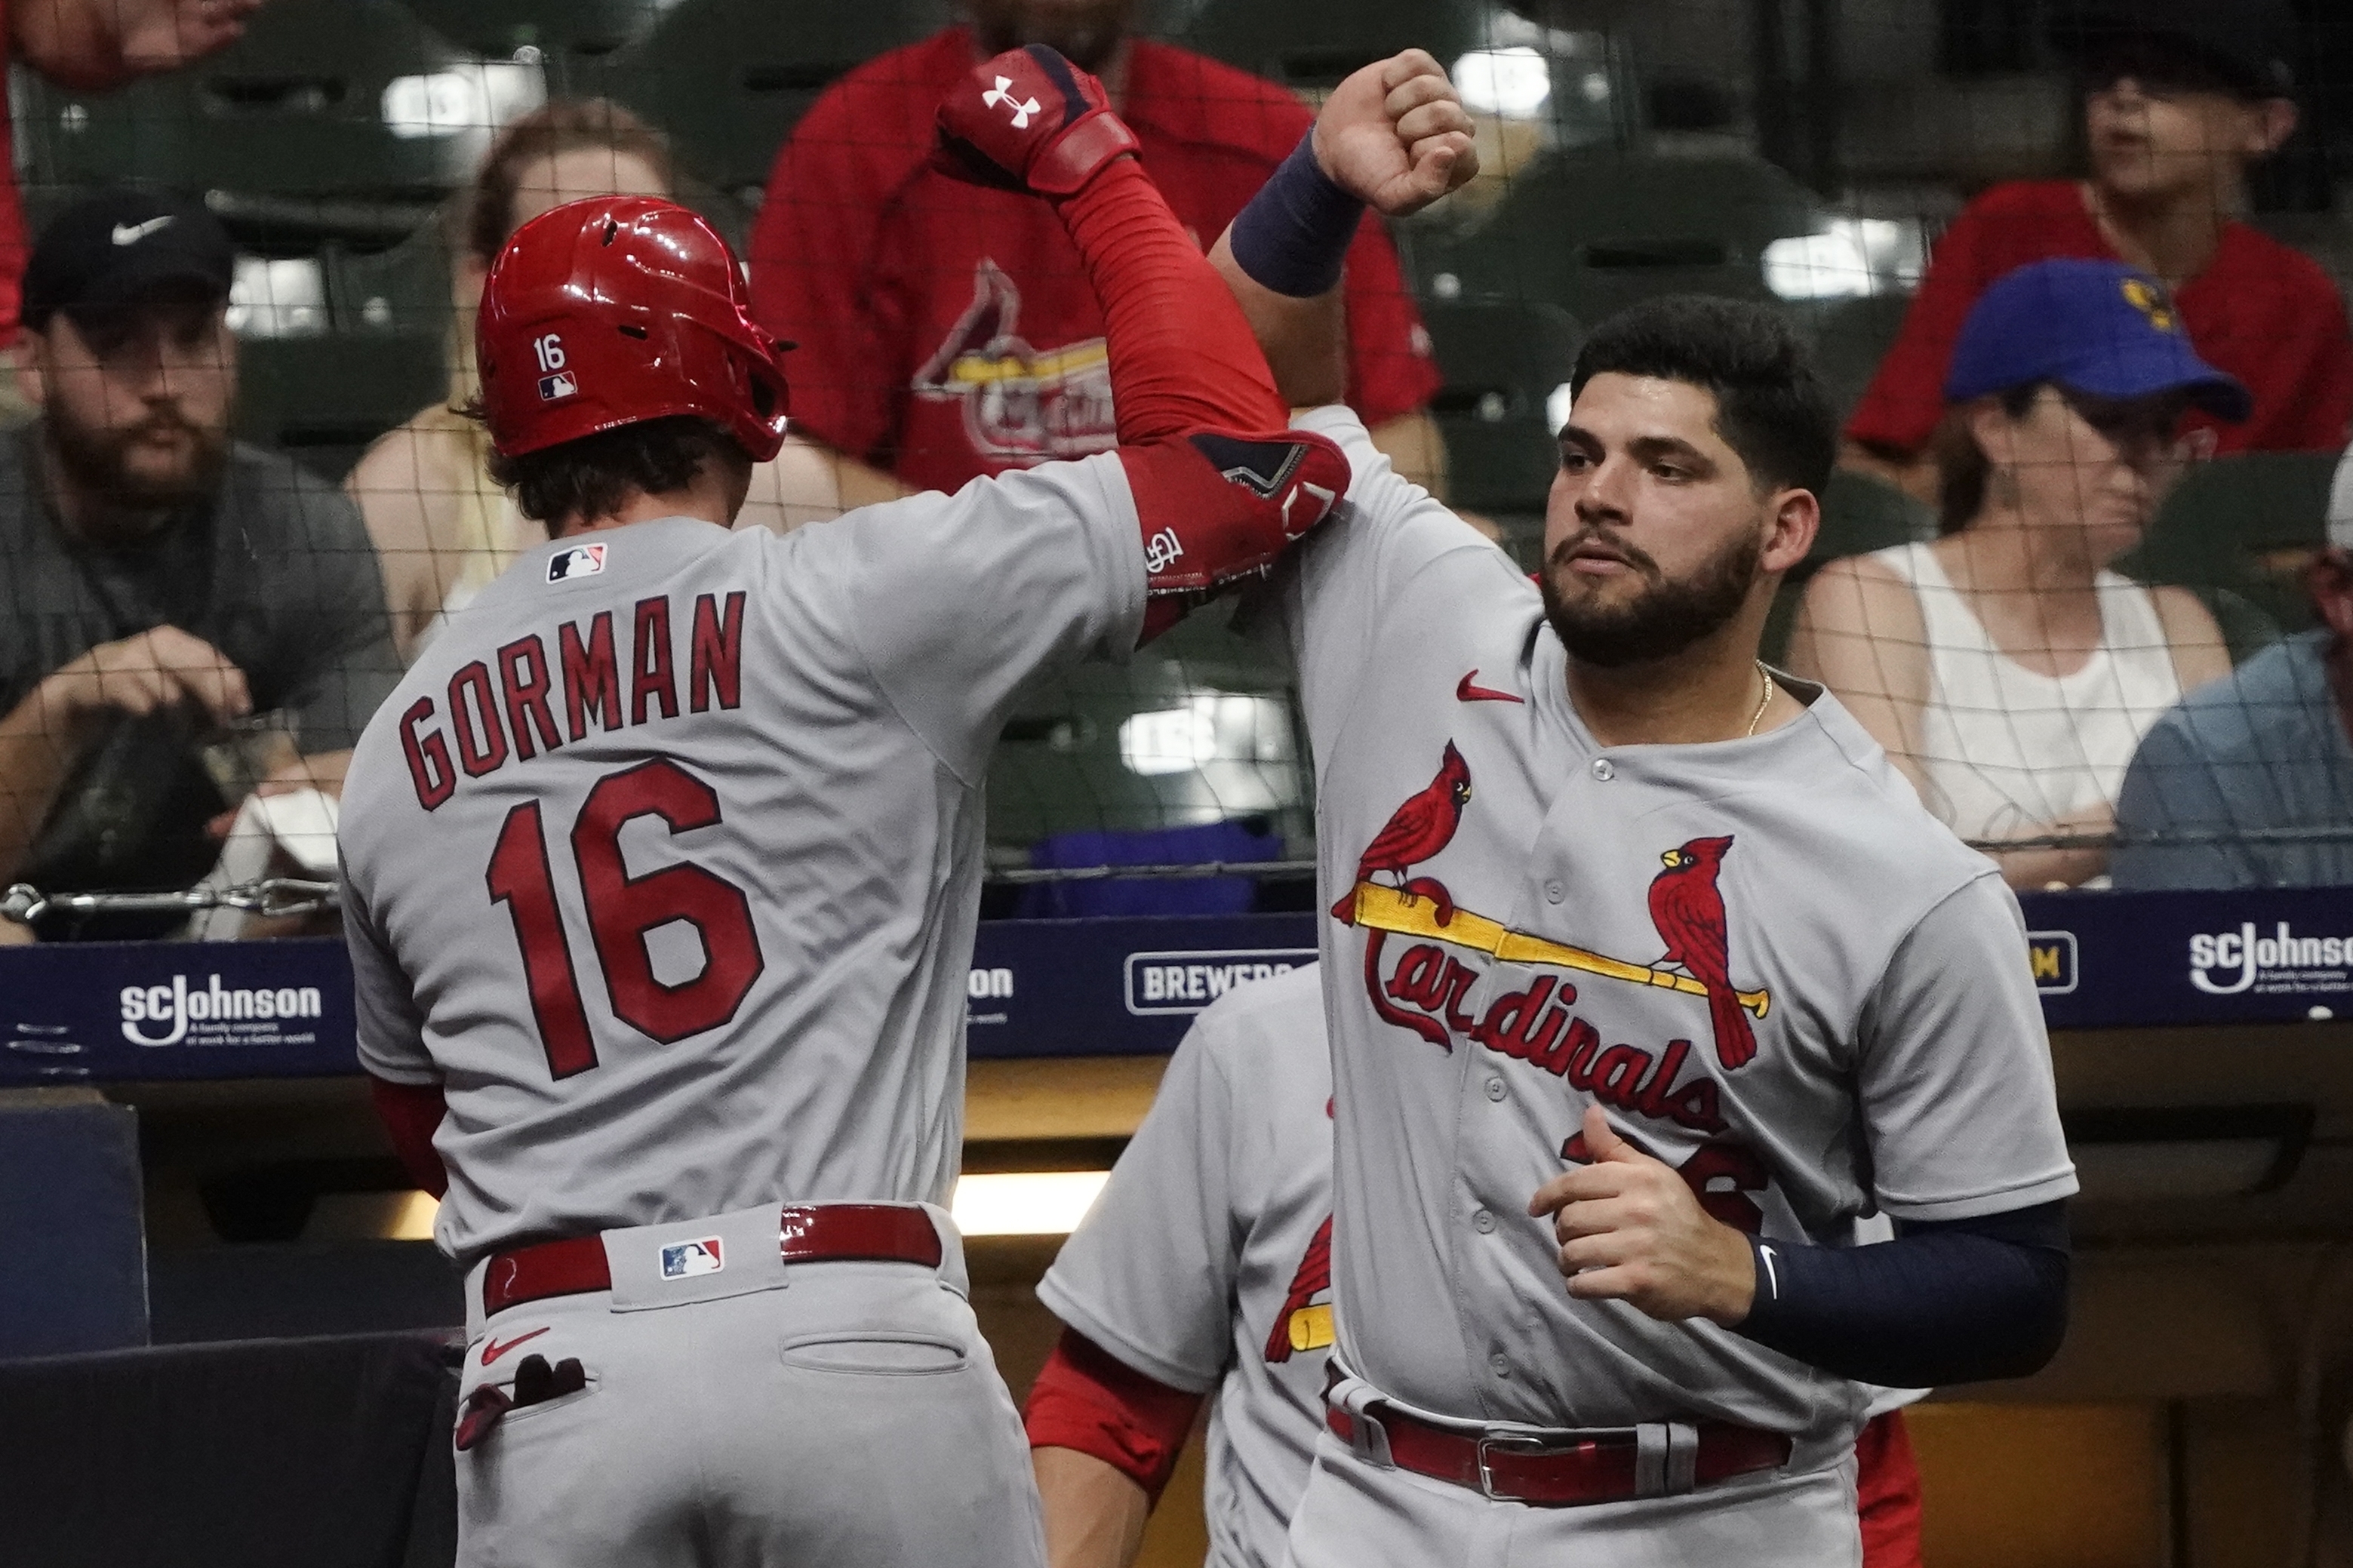 Gorman hits 2 HRs as Cards win to regain share of 1st